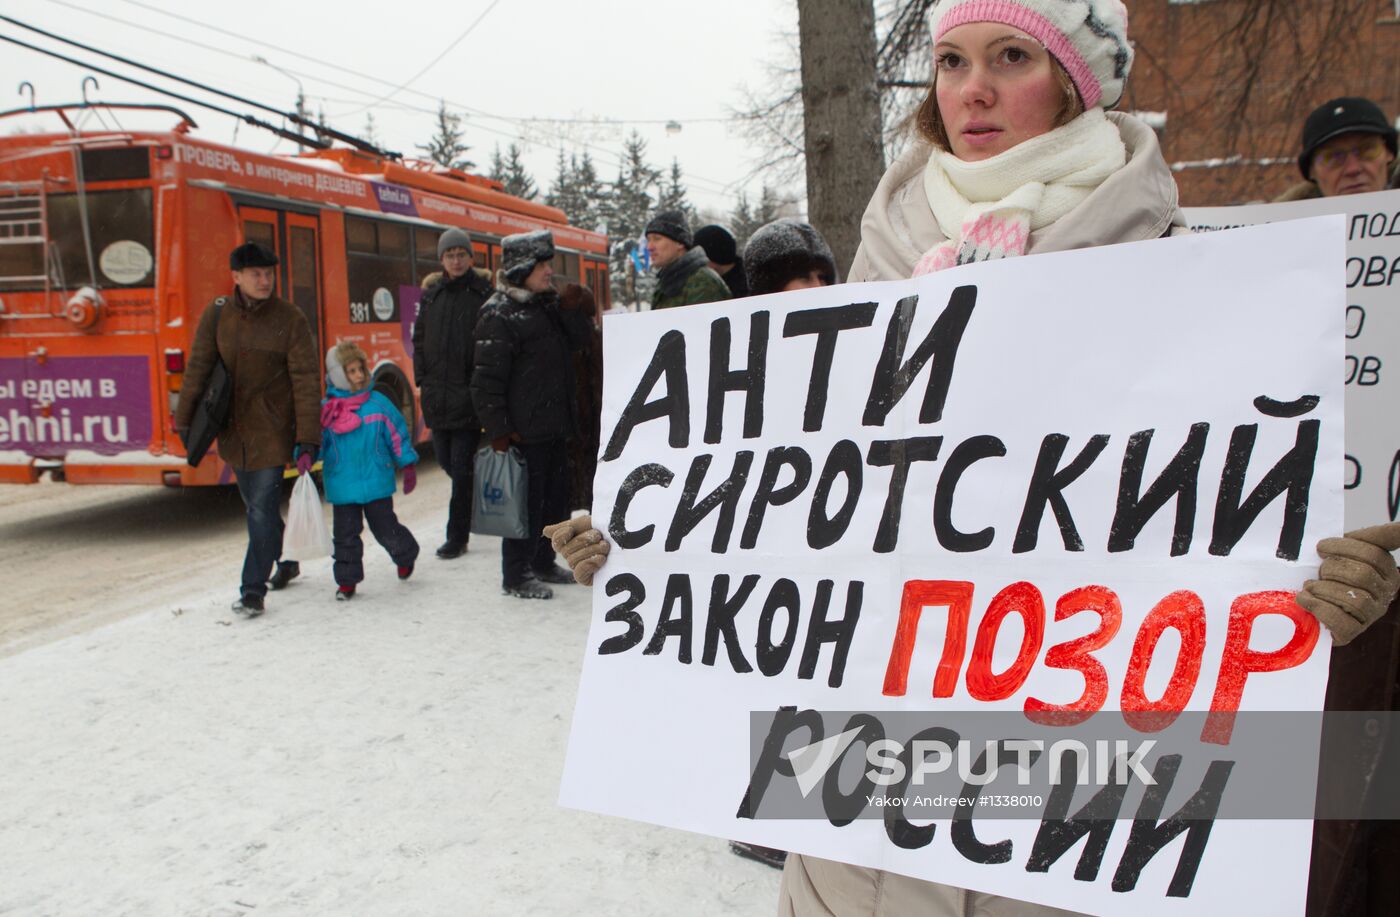 Opposition protests "anti-Magnitsky law" in Russian regions